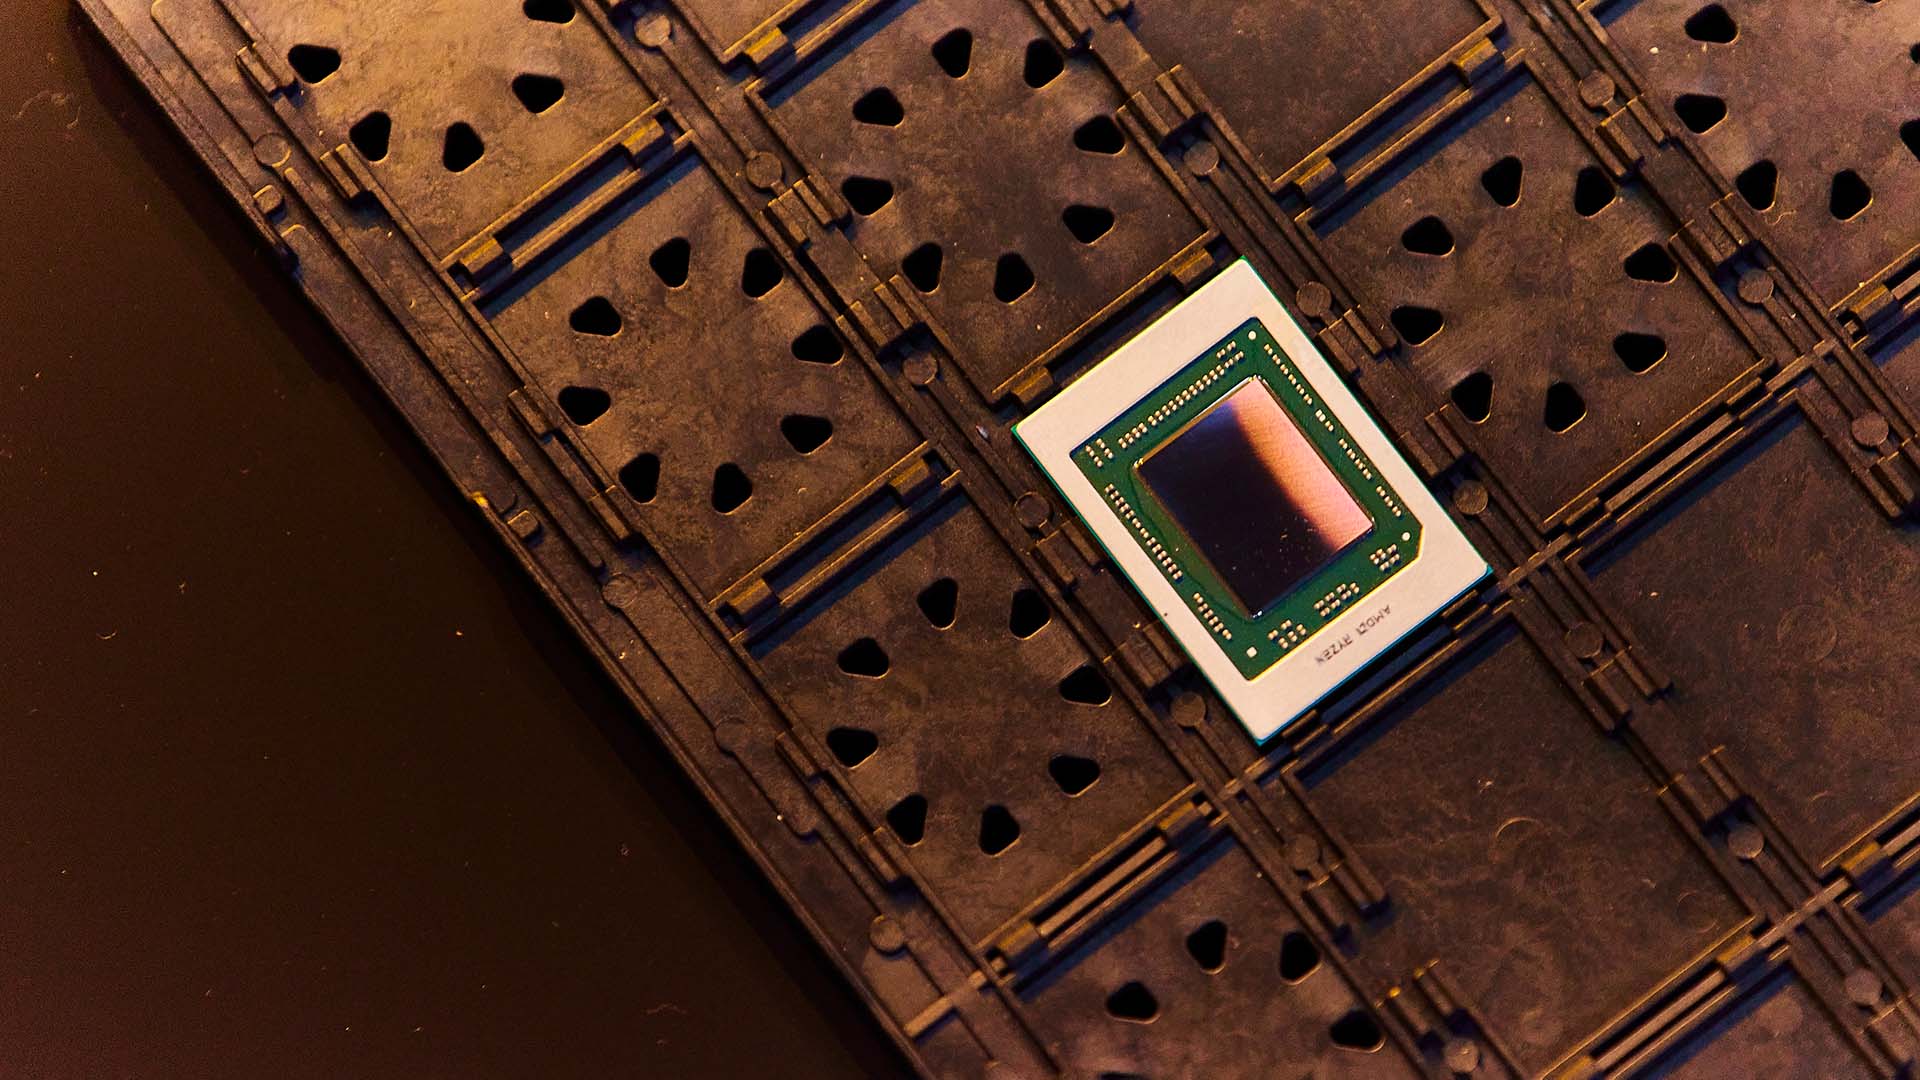  AMD brings serious RDNA 2 graphics power to its new Ryzen 6000 mobile CPUs 